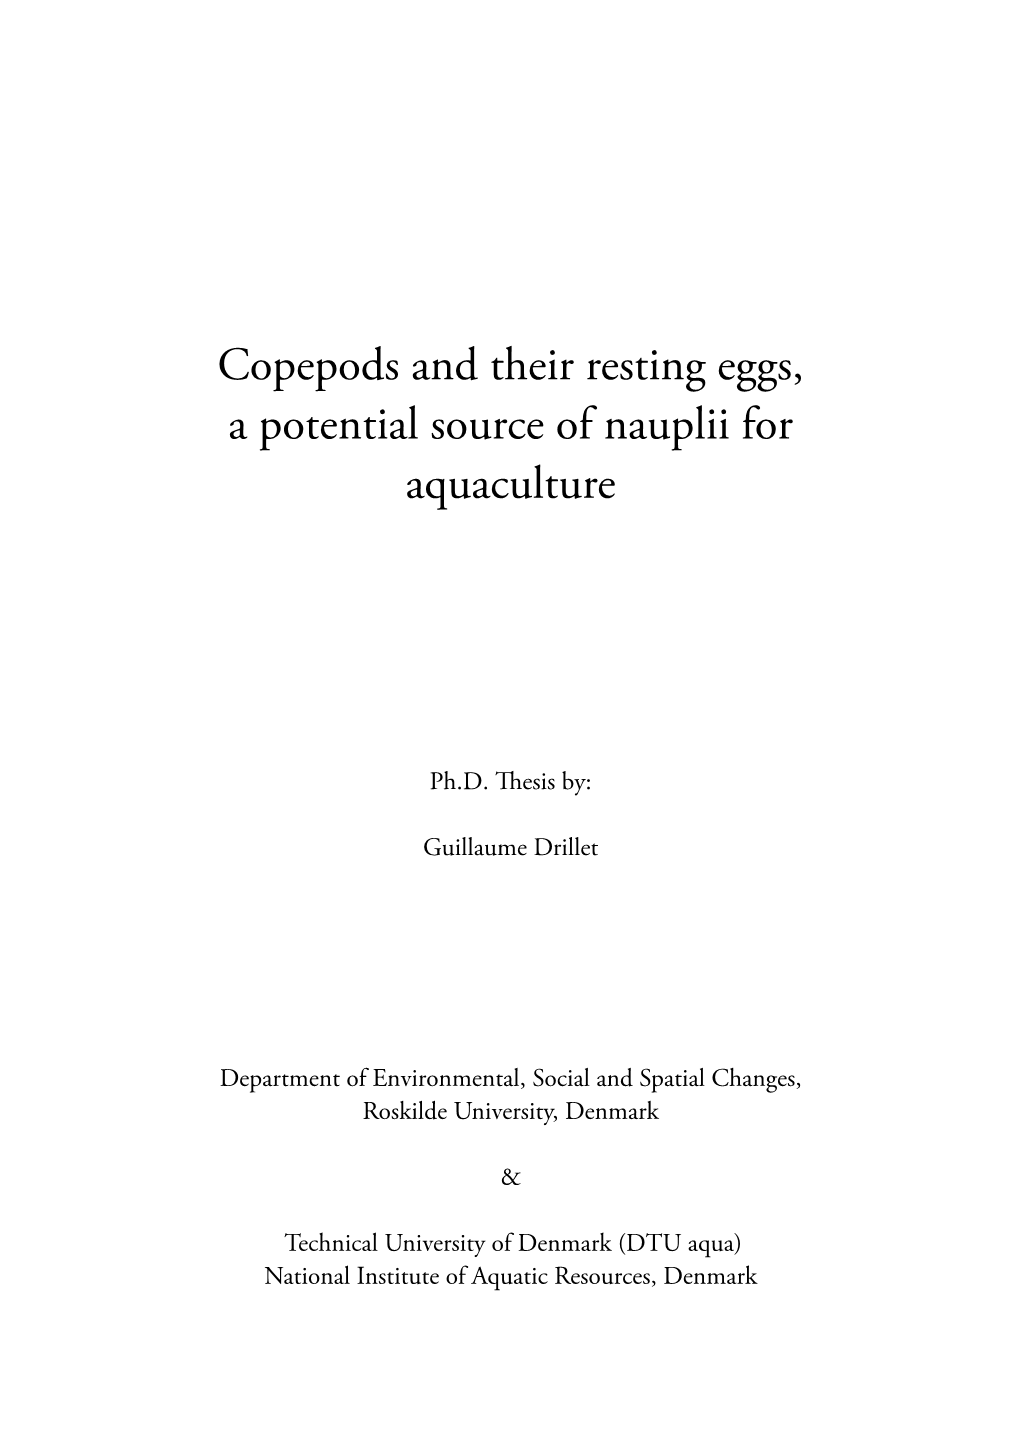 Copepods and Their Resting Eggs, a Potential Source of Nauplii for Aquaculture